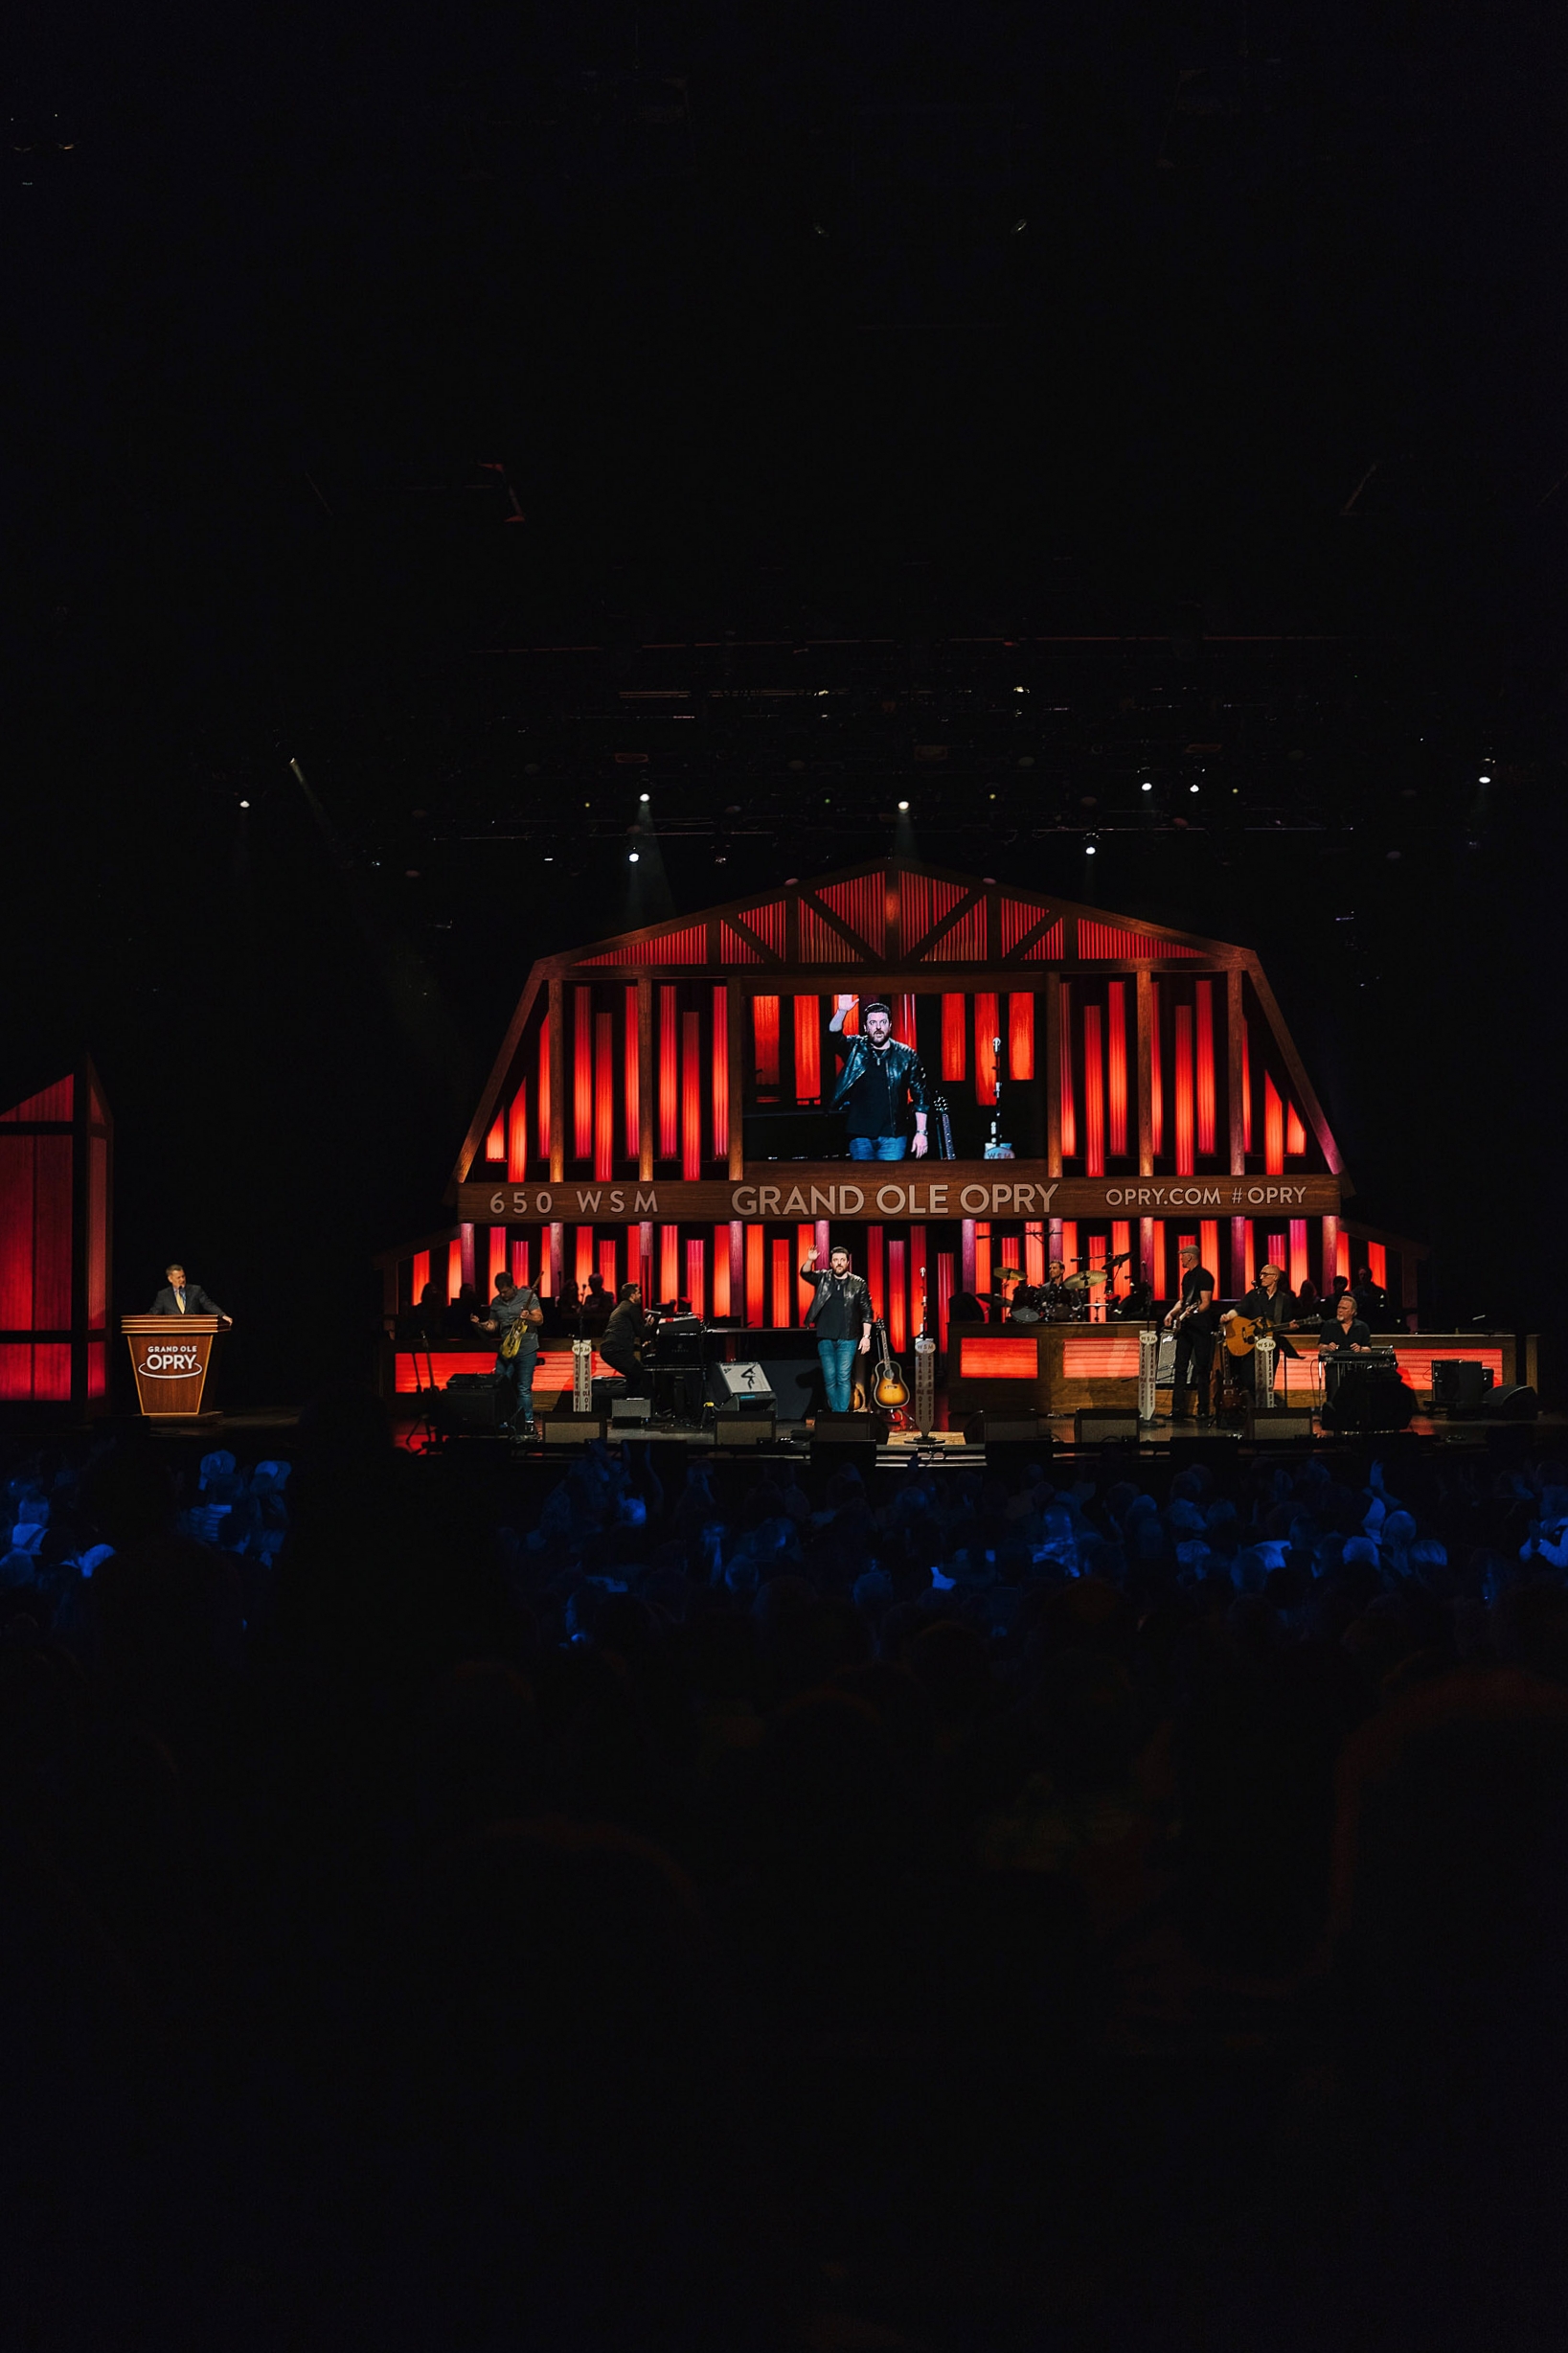 Chris Young performing at the Grand Ole Opry in Nashville